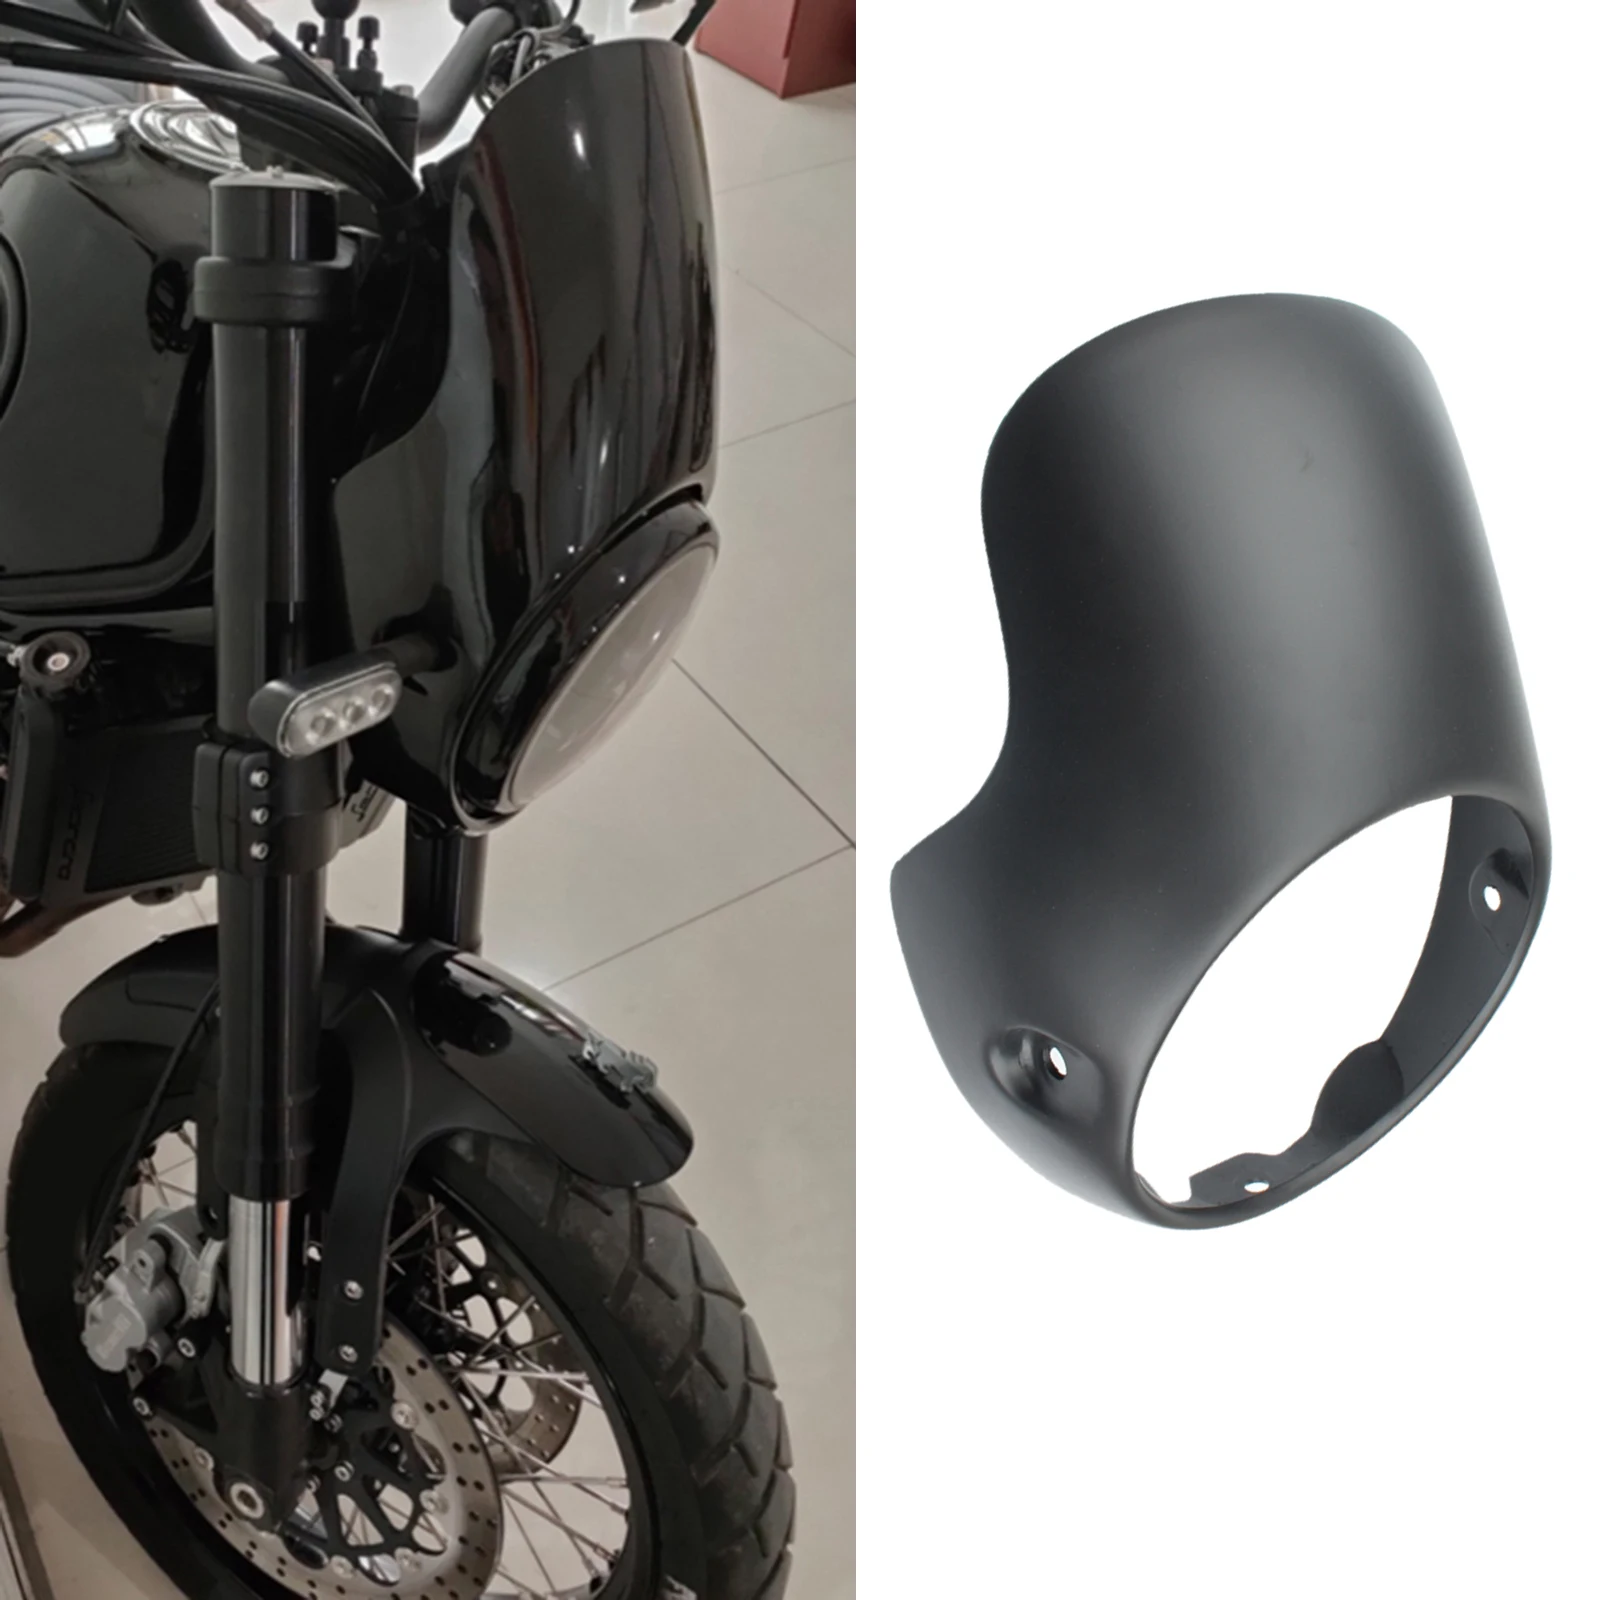 

Motorcycle 7" Headlight Protector Fairing Windshield Kit Screen Cafe Racer Style Fit for Harley 1200 883 FLHT Bobber Touring